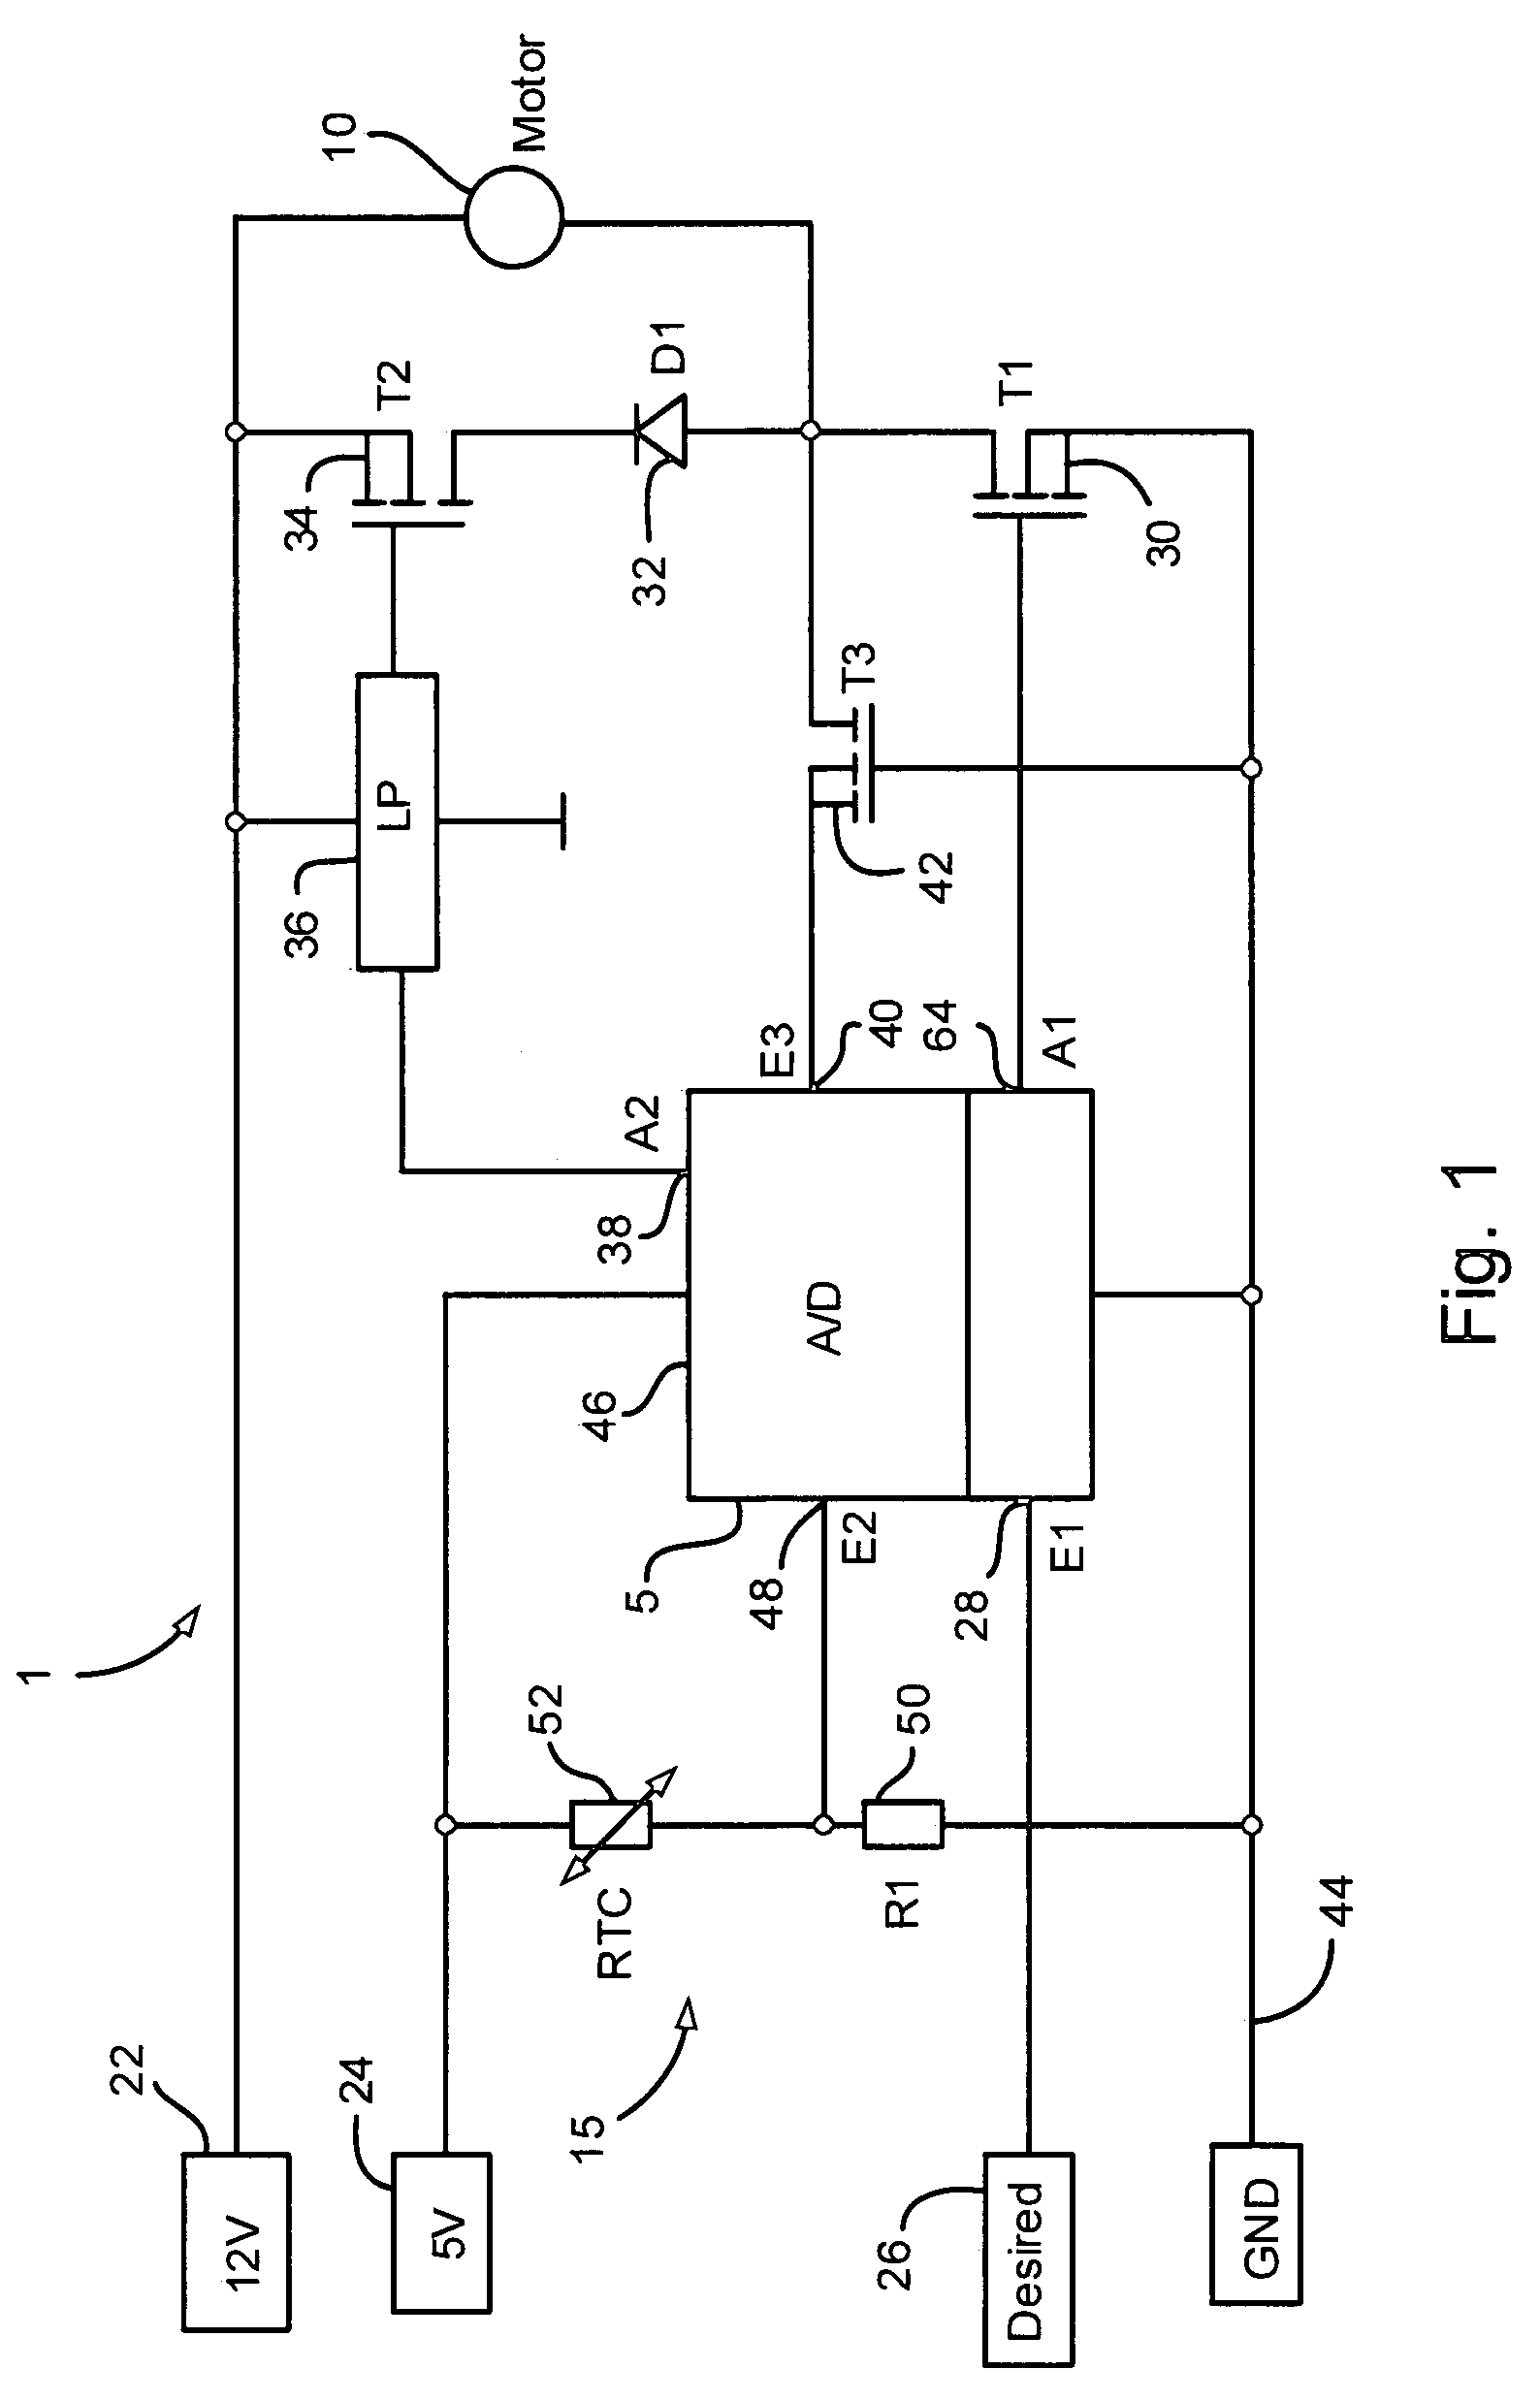 Motor control system for the PWM control of an electric motor